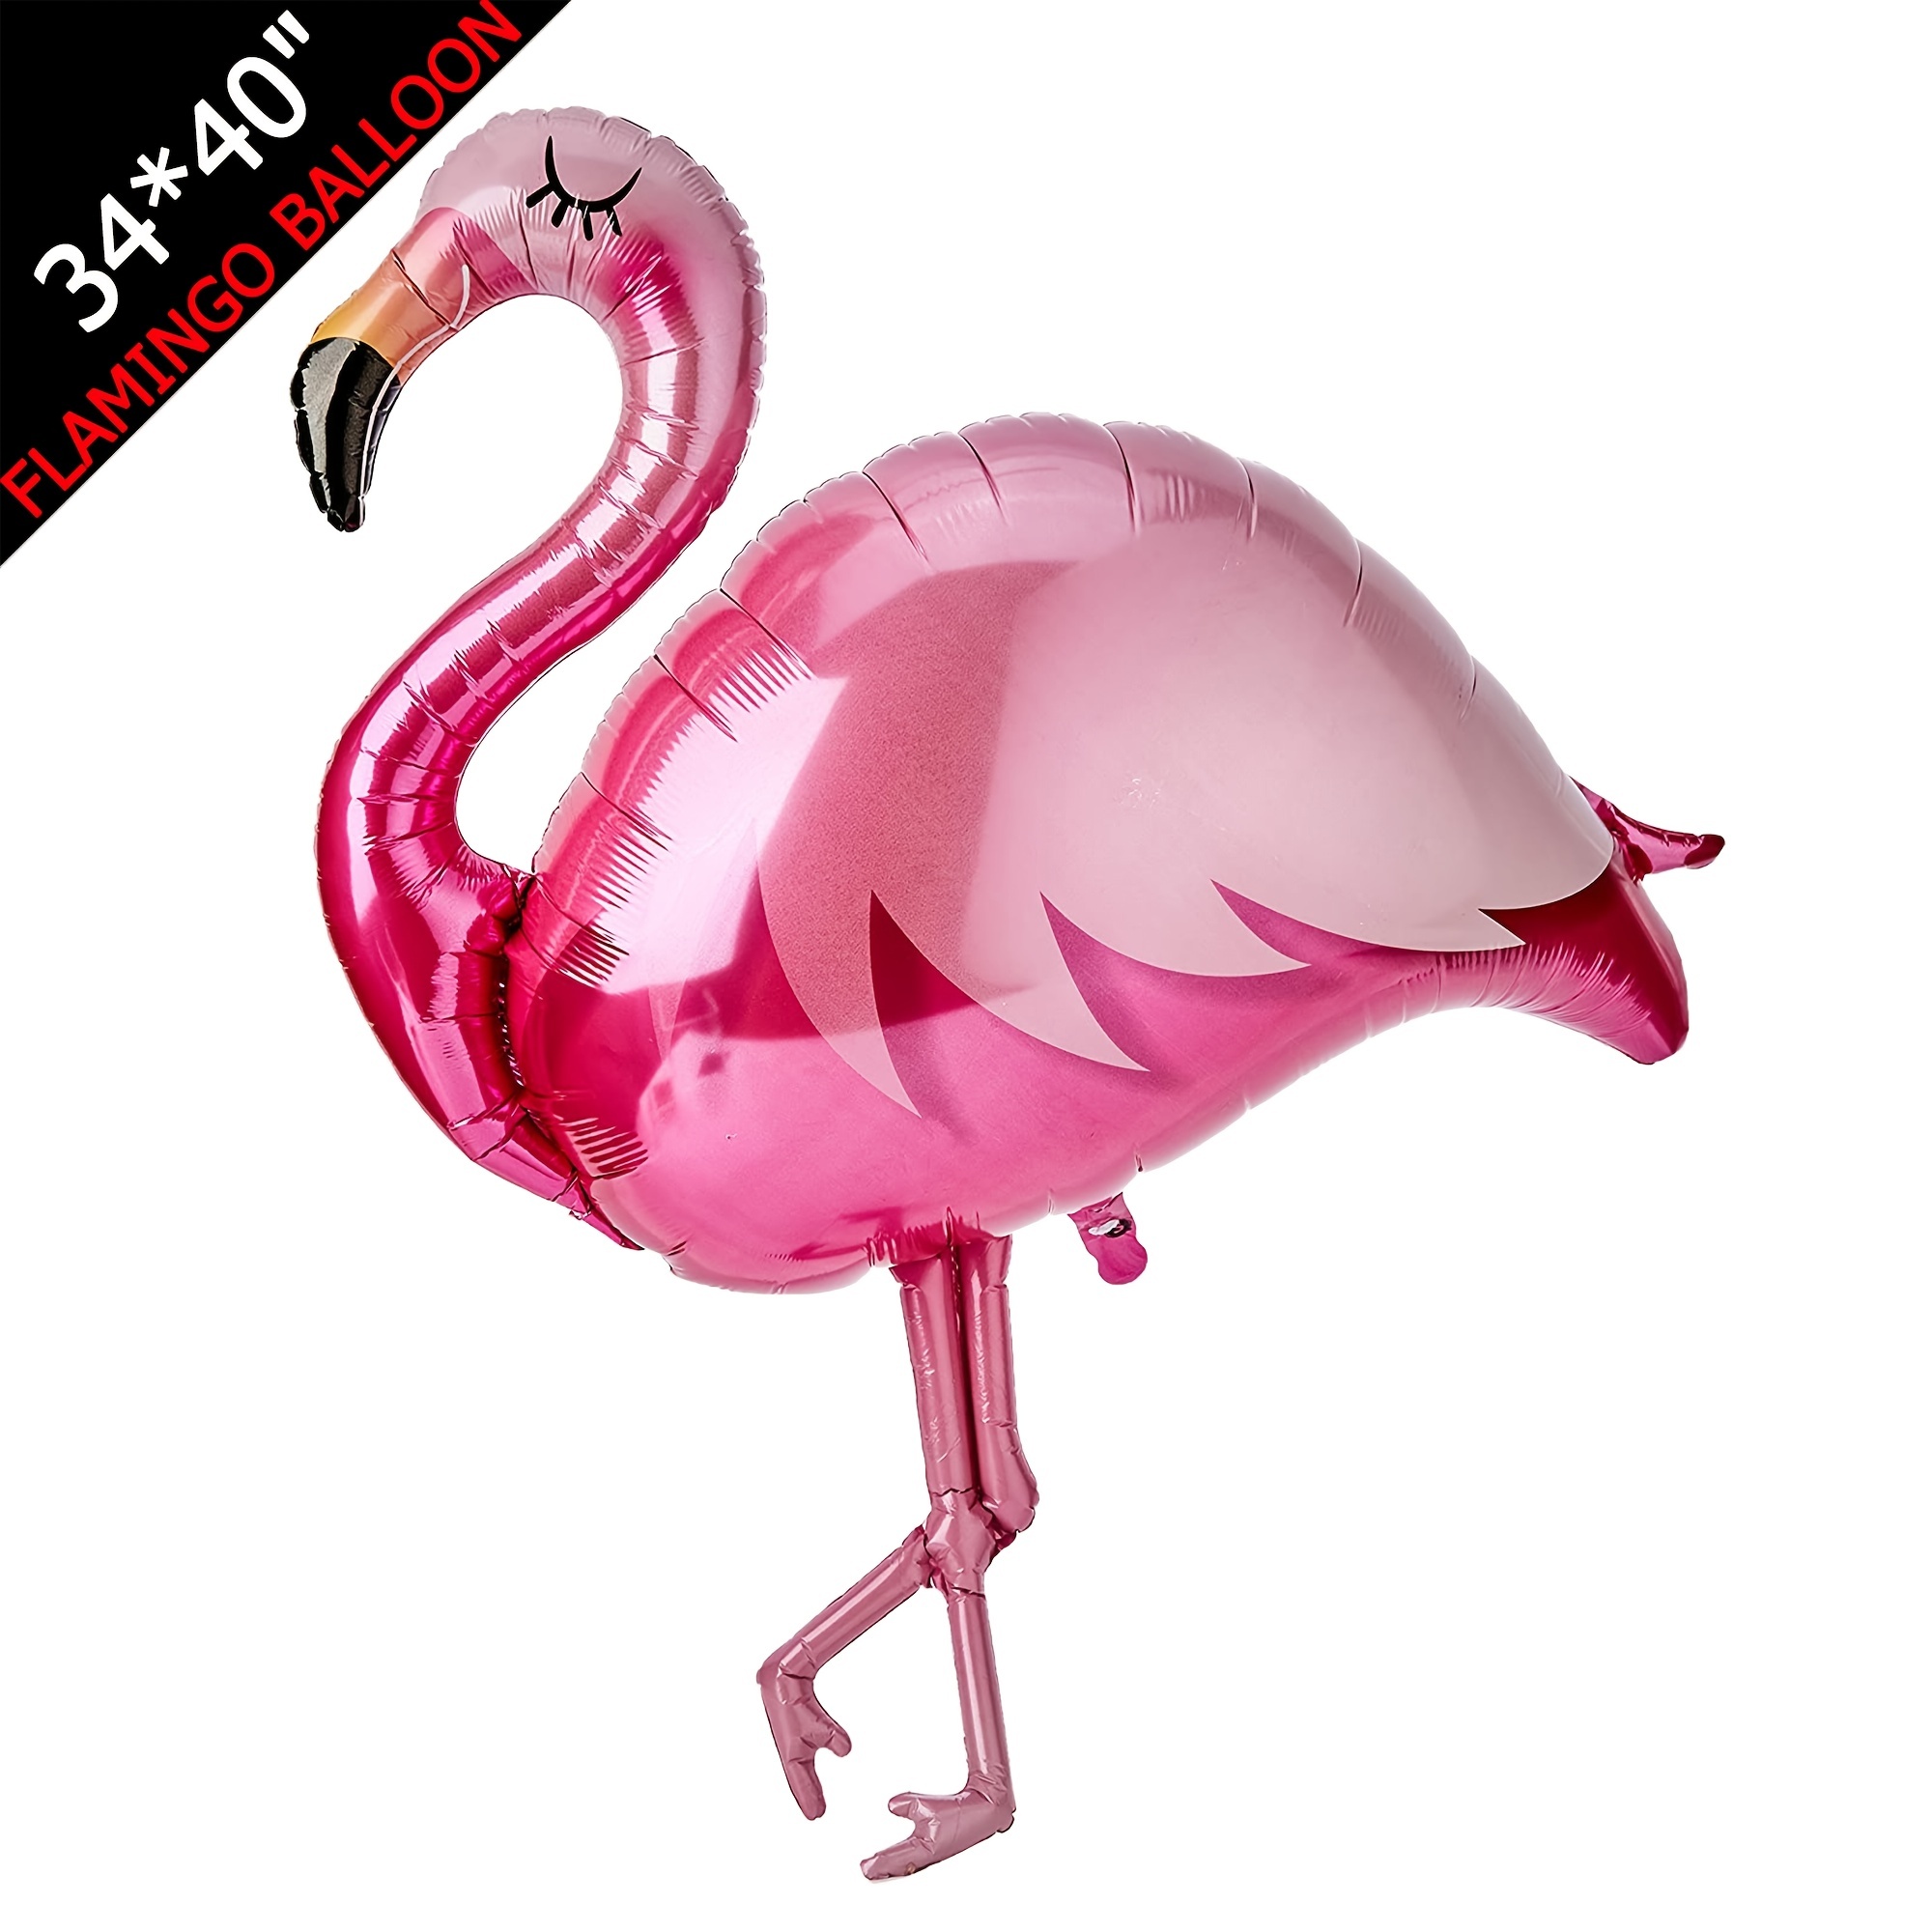 

Flamingo Foil Balloon Giant Balloon For Air And Helium As A Birthday Gift, Party Decoration Birthday Wedding Birthday Party Supplies Christmas, Halloween, Thanksgiving Day Gift